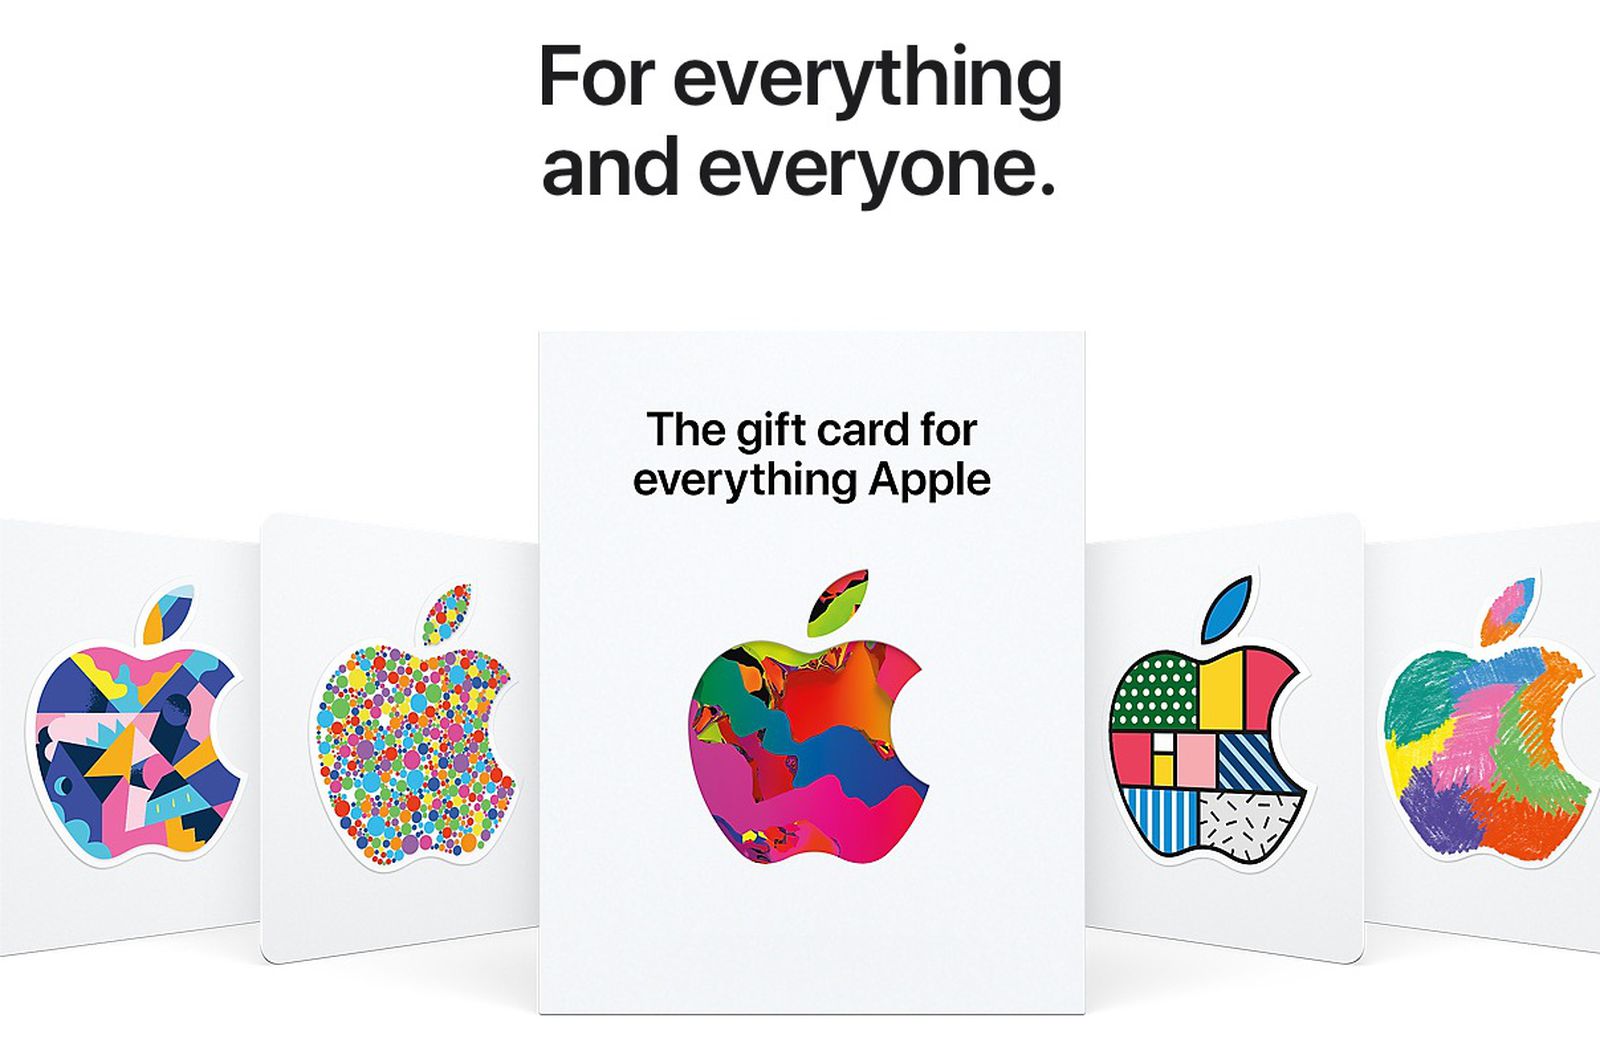 Apple Launches New Gift Card for 'Everything Apple' - MacRumors